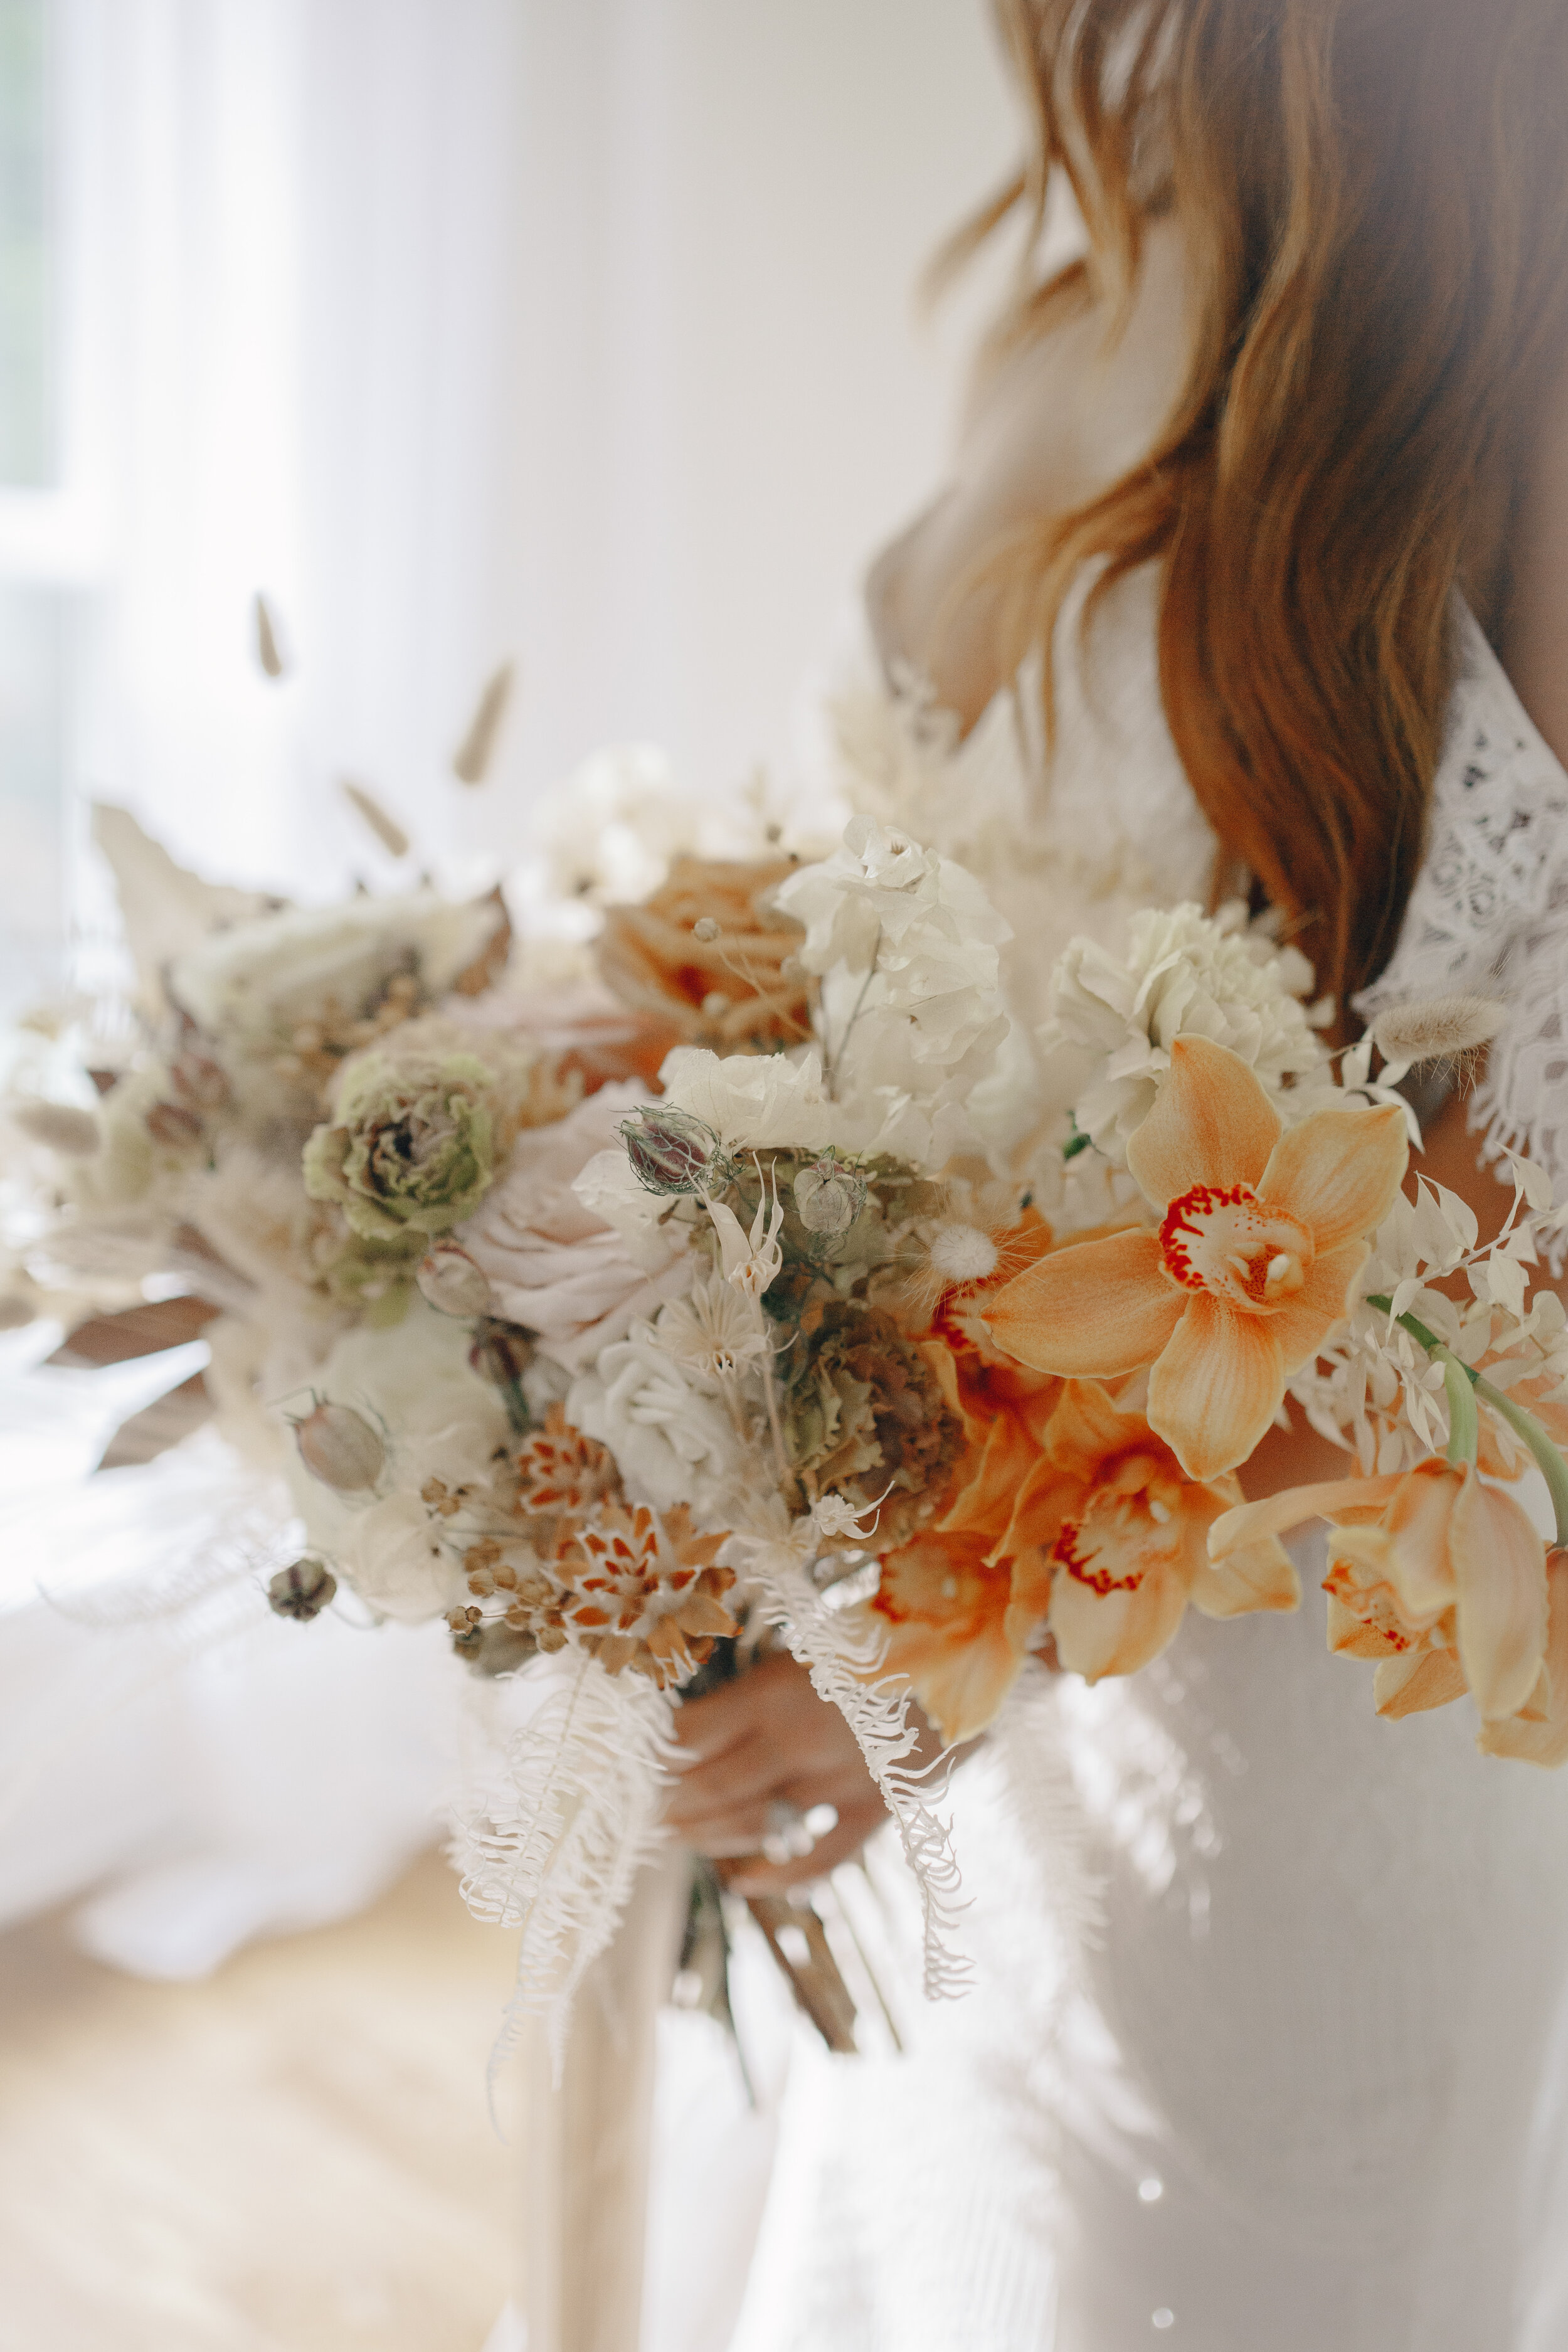 Lush, bohemian bridal bouquet with white garden roses, copper orchids, dried white ferns, earthy textures, and toffee lisianthus. Nashville wedding and elopement floral designer.